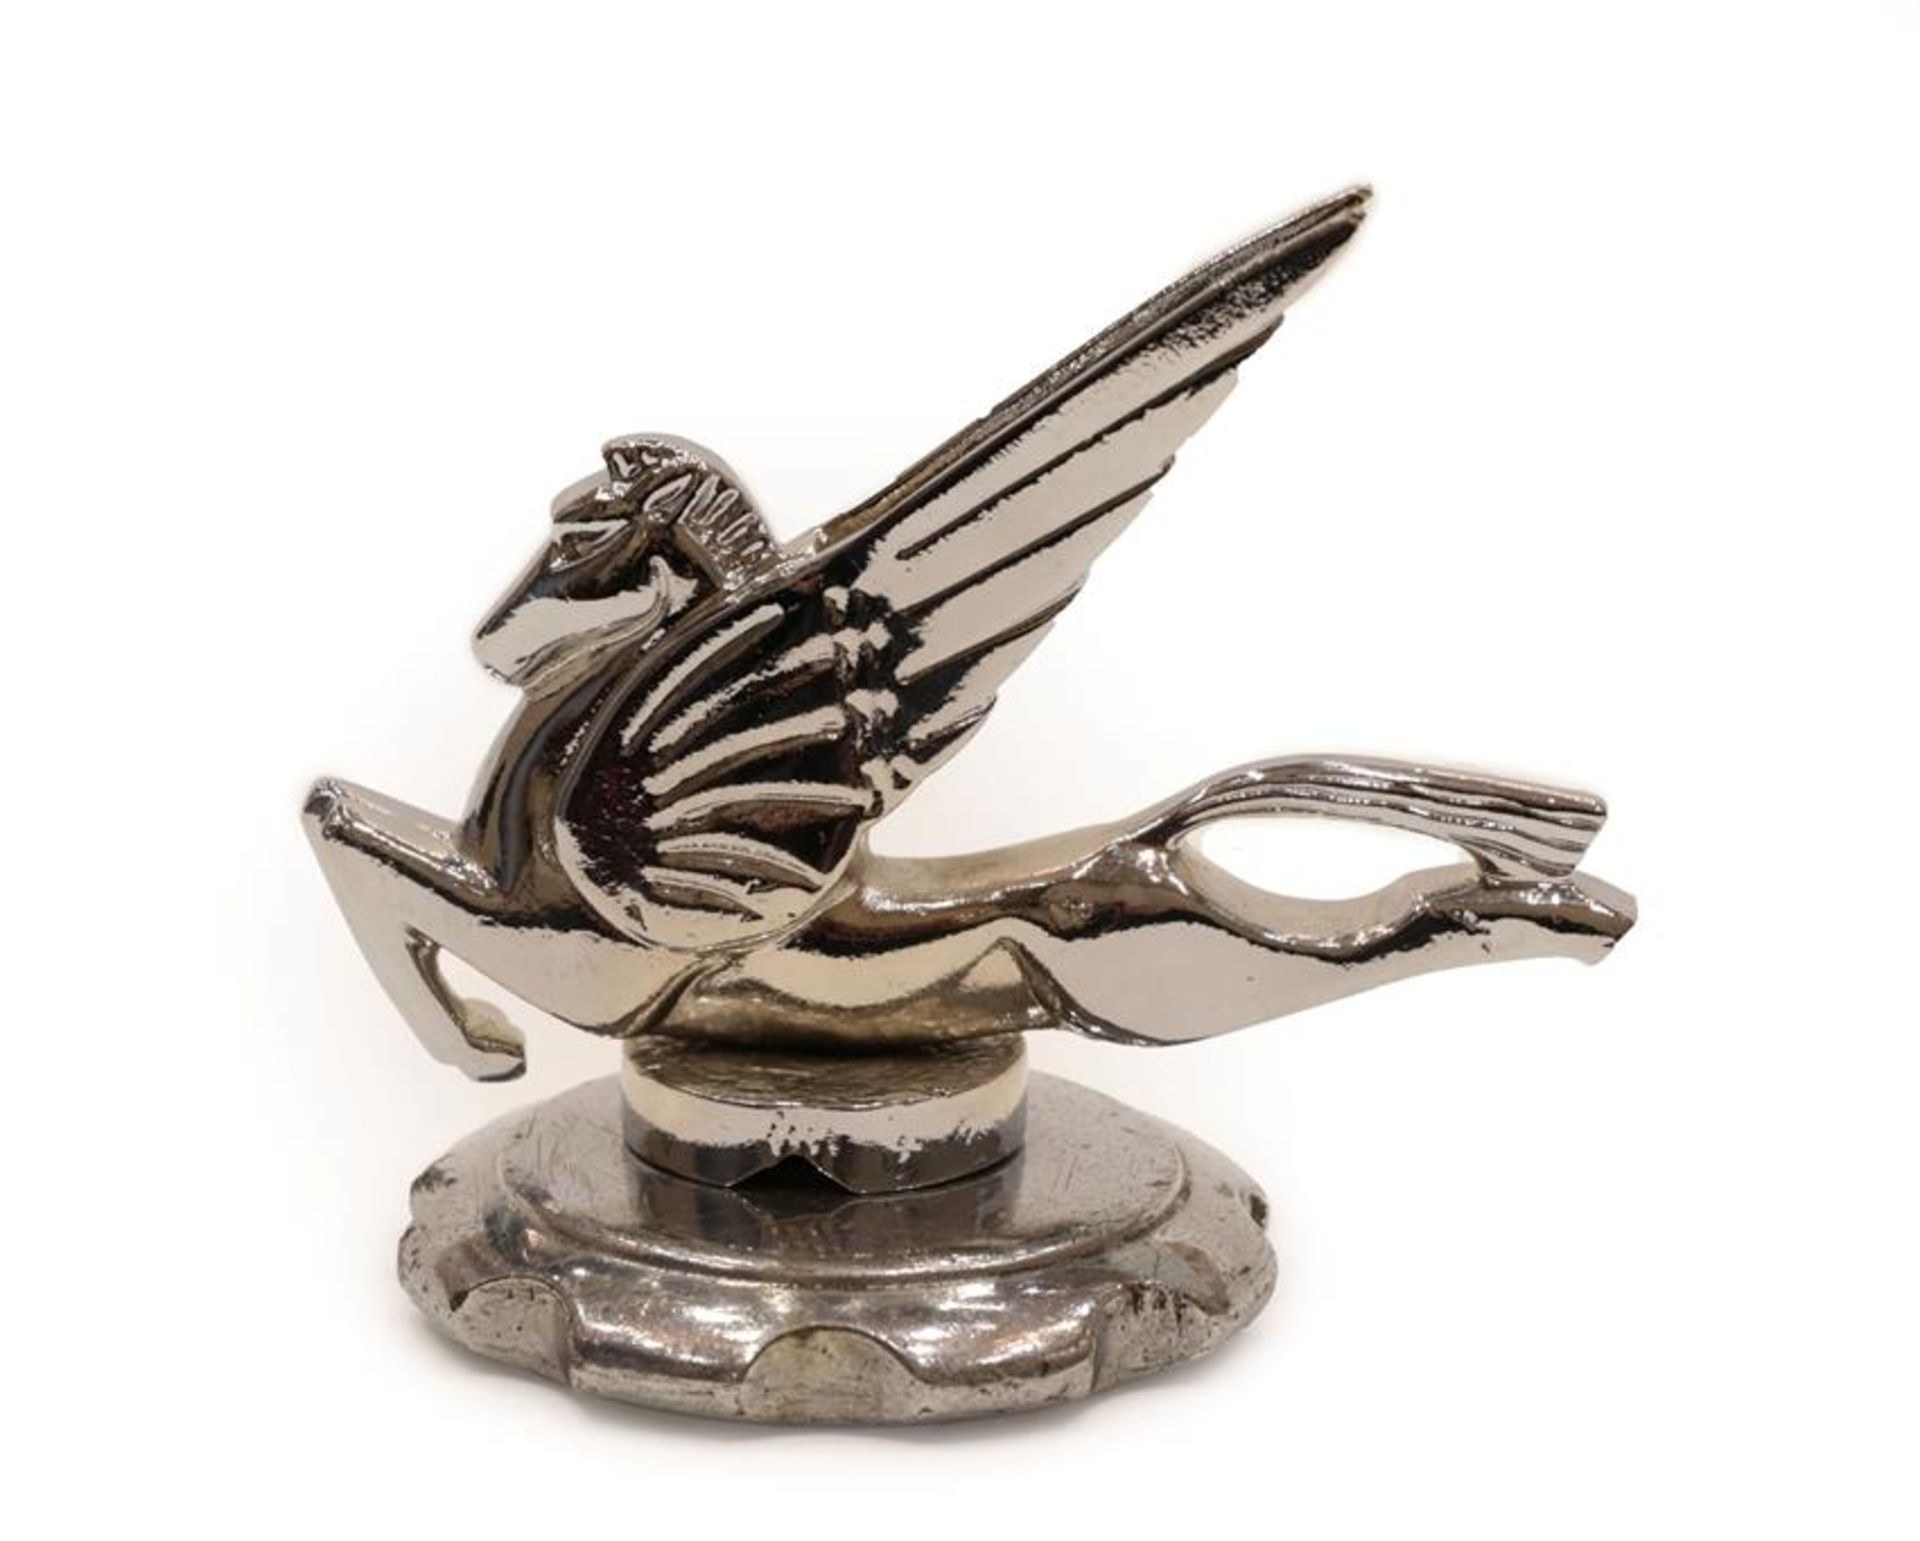 A 1930's Chromed Car Mascot as Pegasus, the winged horse on a circular base and screw-thread